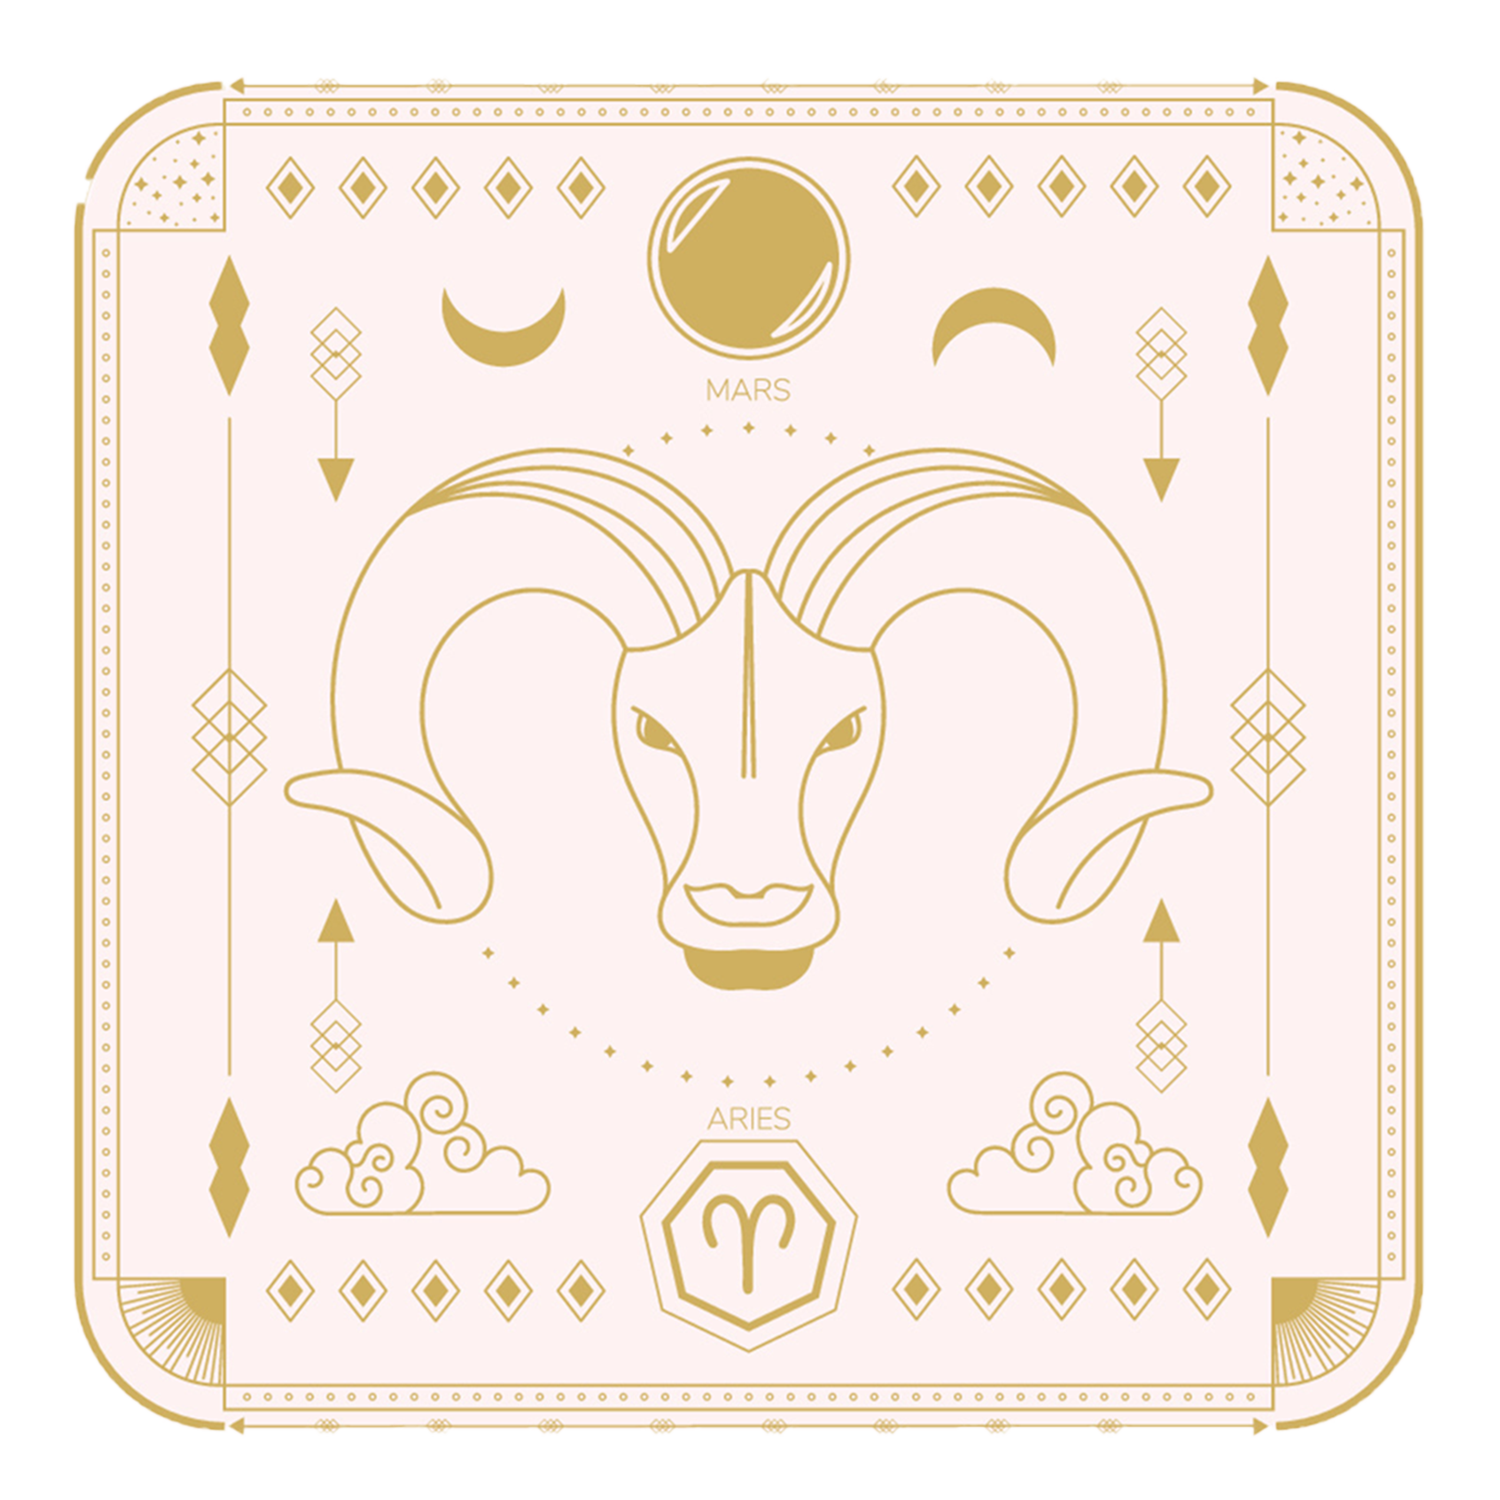 ARIES | THE MOMENT YOU'VE BEEN WAITING FOR | APRIL, 2022 MONTHLY TAROT READING.